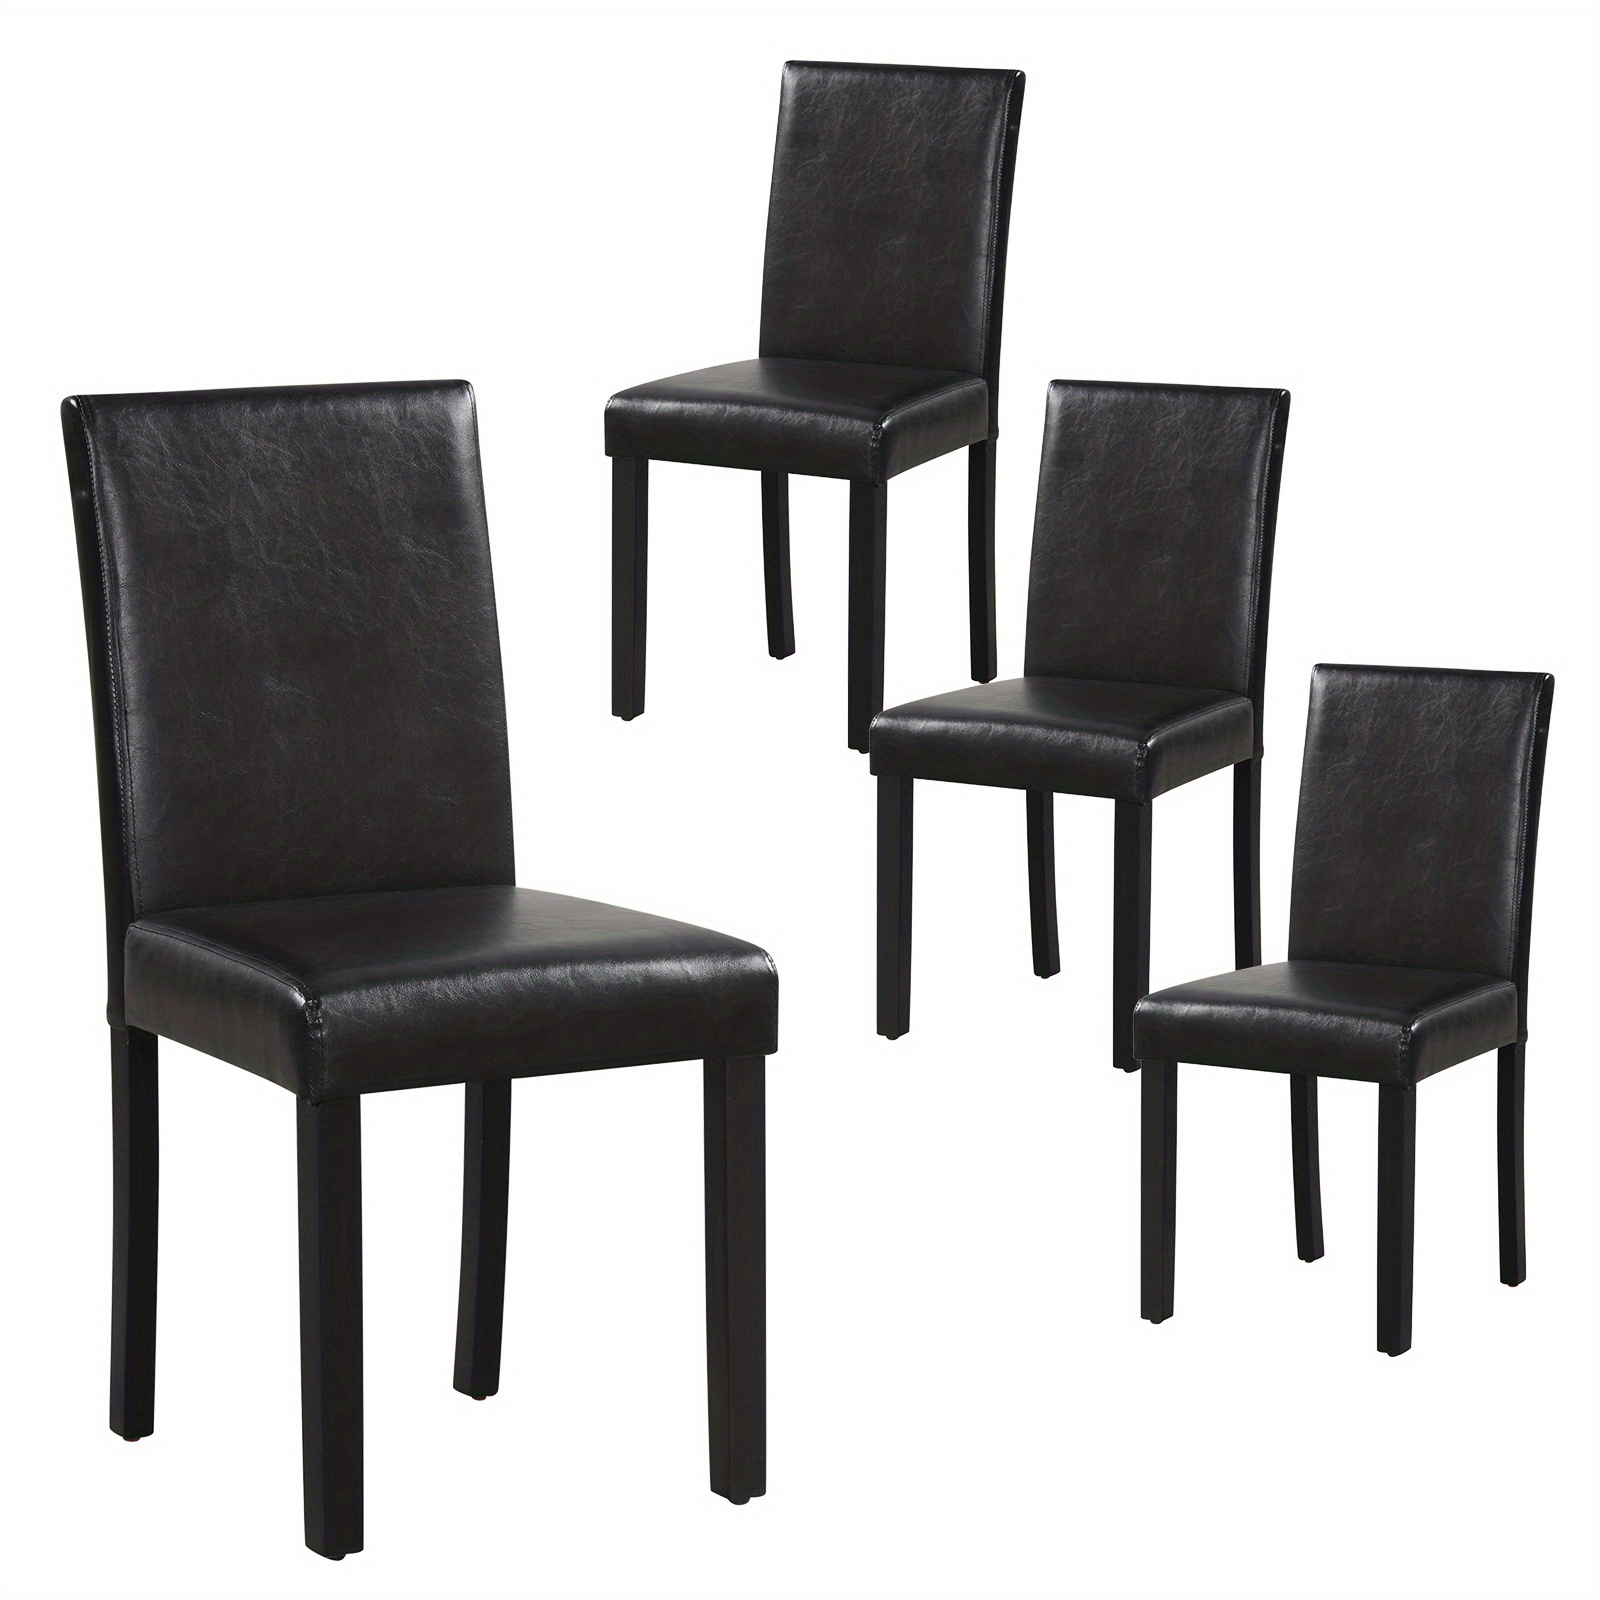 

Safstar Dining Chair Set Of 4 W/ Acacia Wood Frame & Rubber Wood Legs Padded Backrest